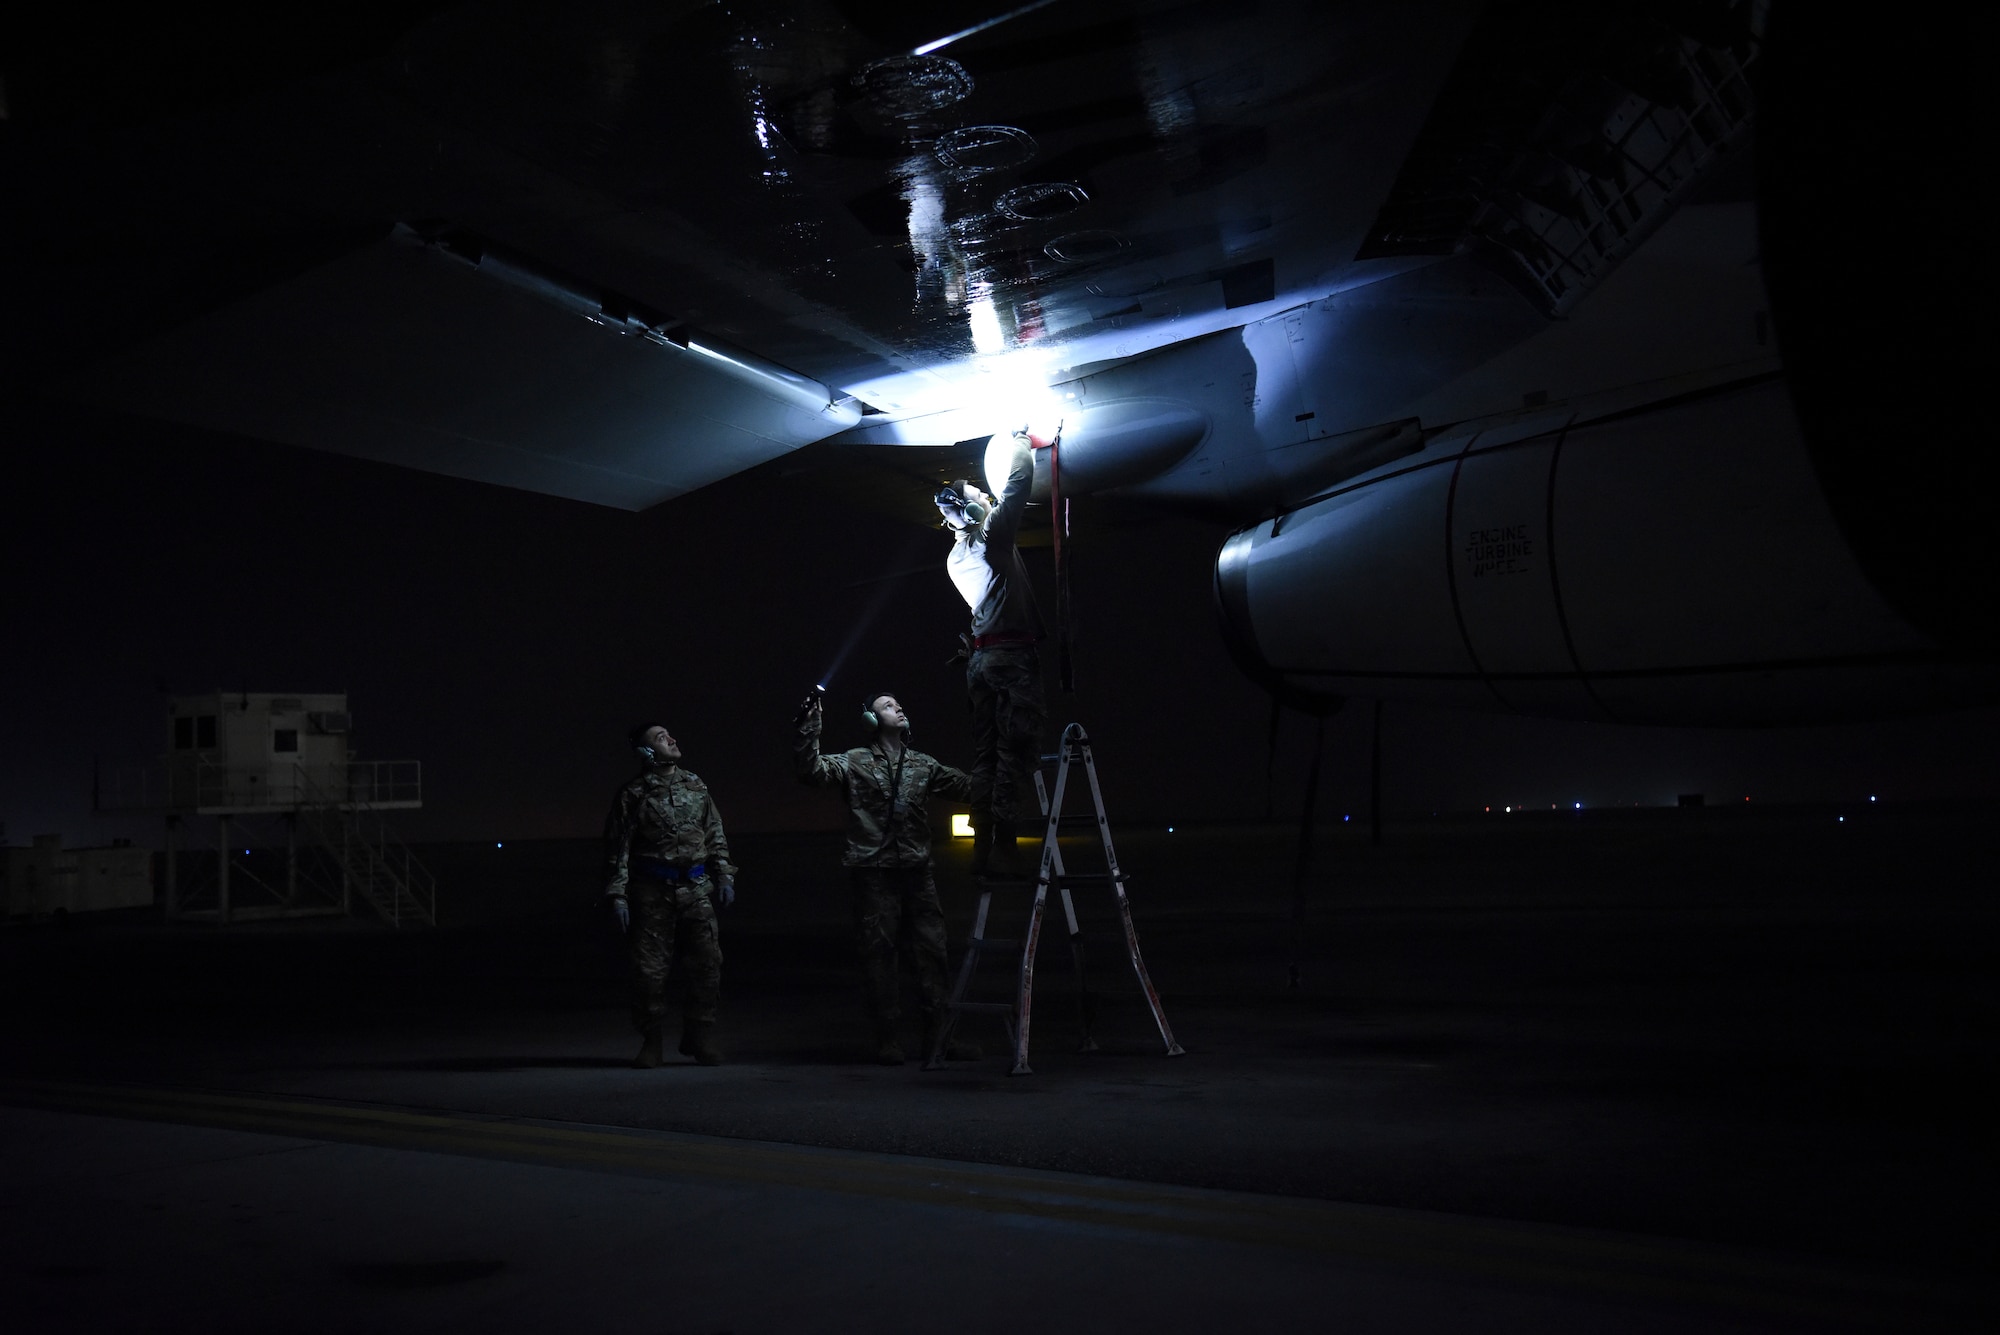 380th Expeditionary Aircraft Maintenance Squadron crew chief members inspect underneath the wing of an E-3 Sentry after landing at Al Dhafra Air Base, United Arab Emirates, Mar. 7, 2019.